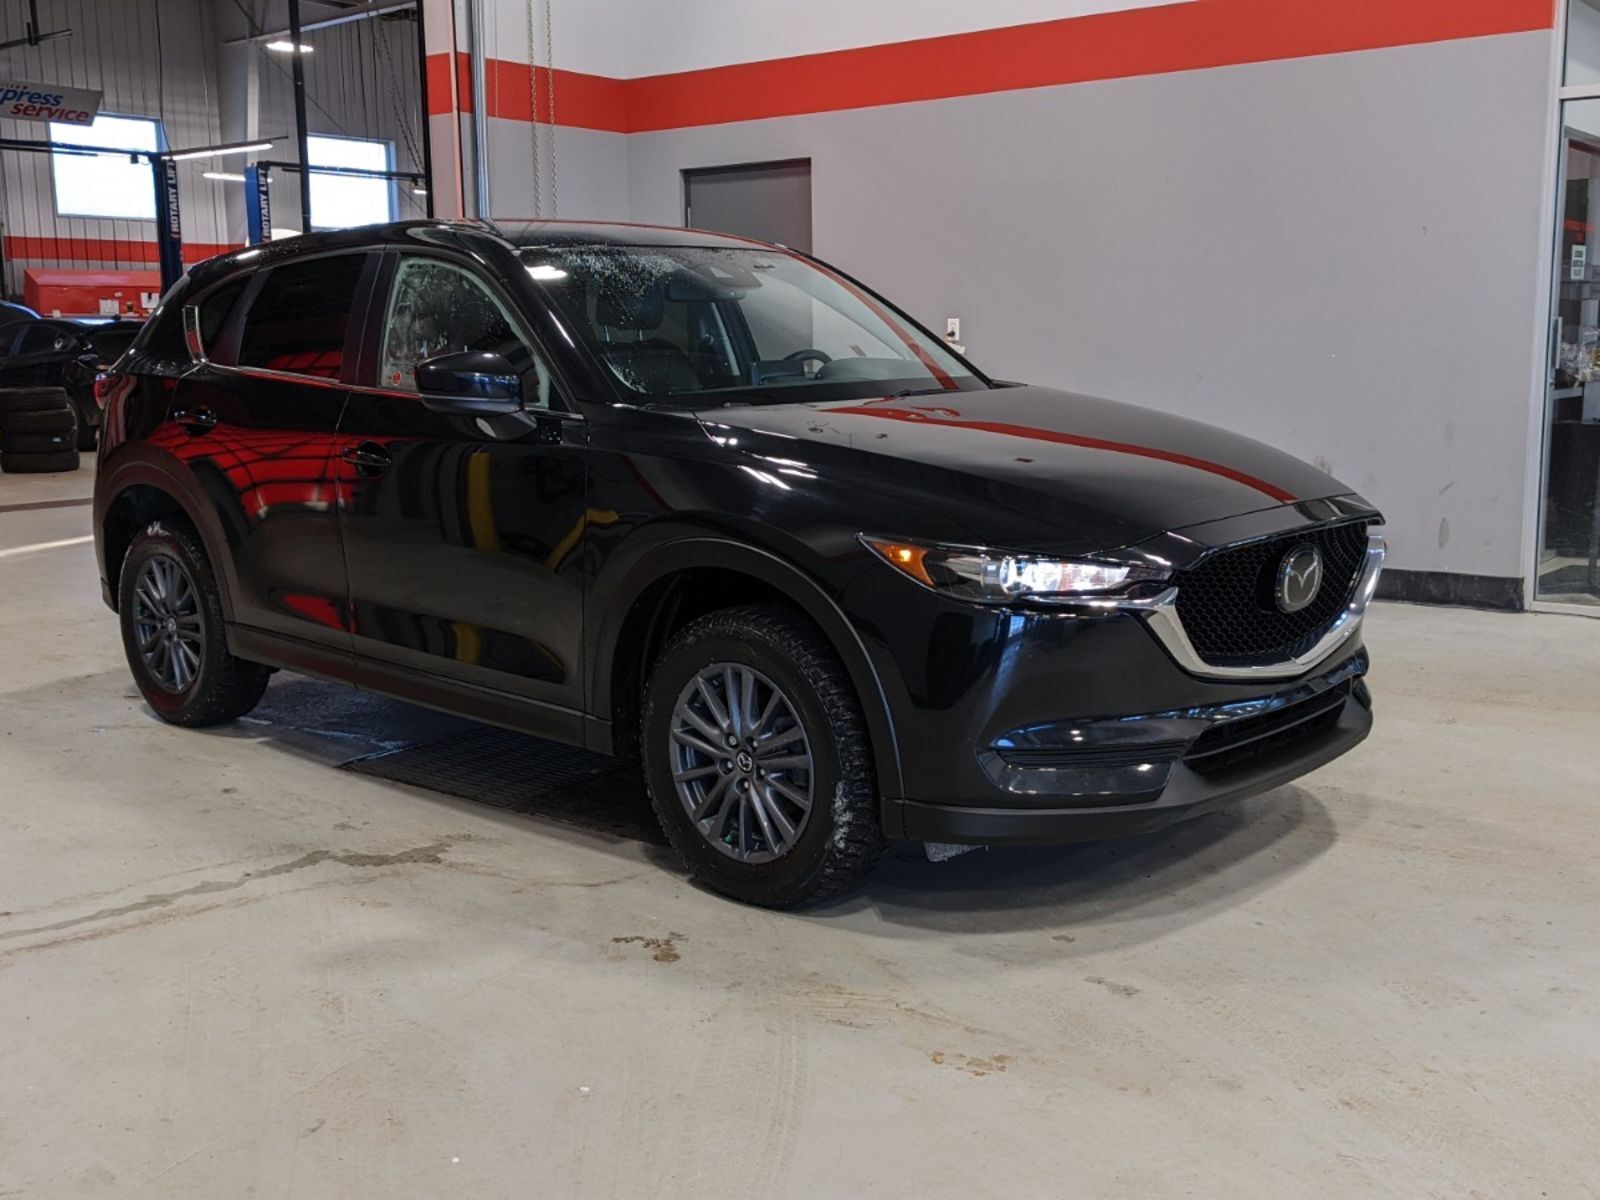 2021 Mazda CX-5 GS - Heated seats/wheel, leather bolstered seats, 